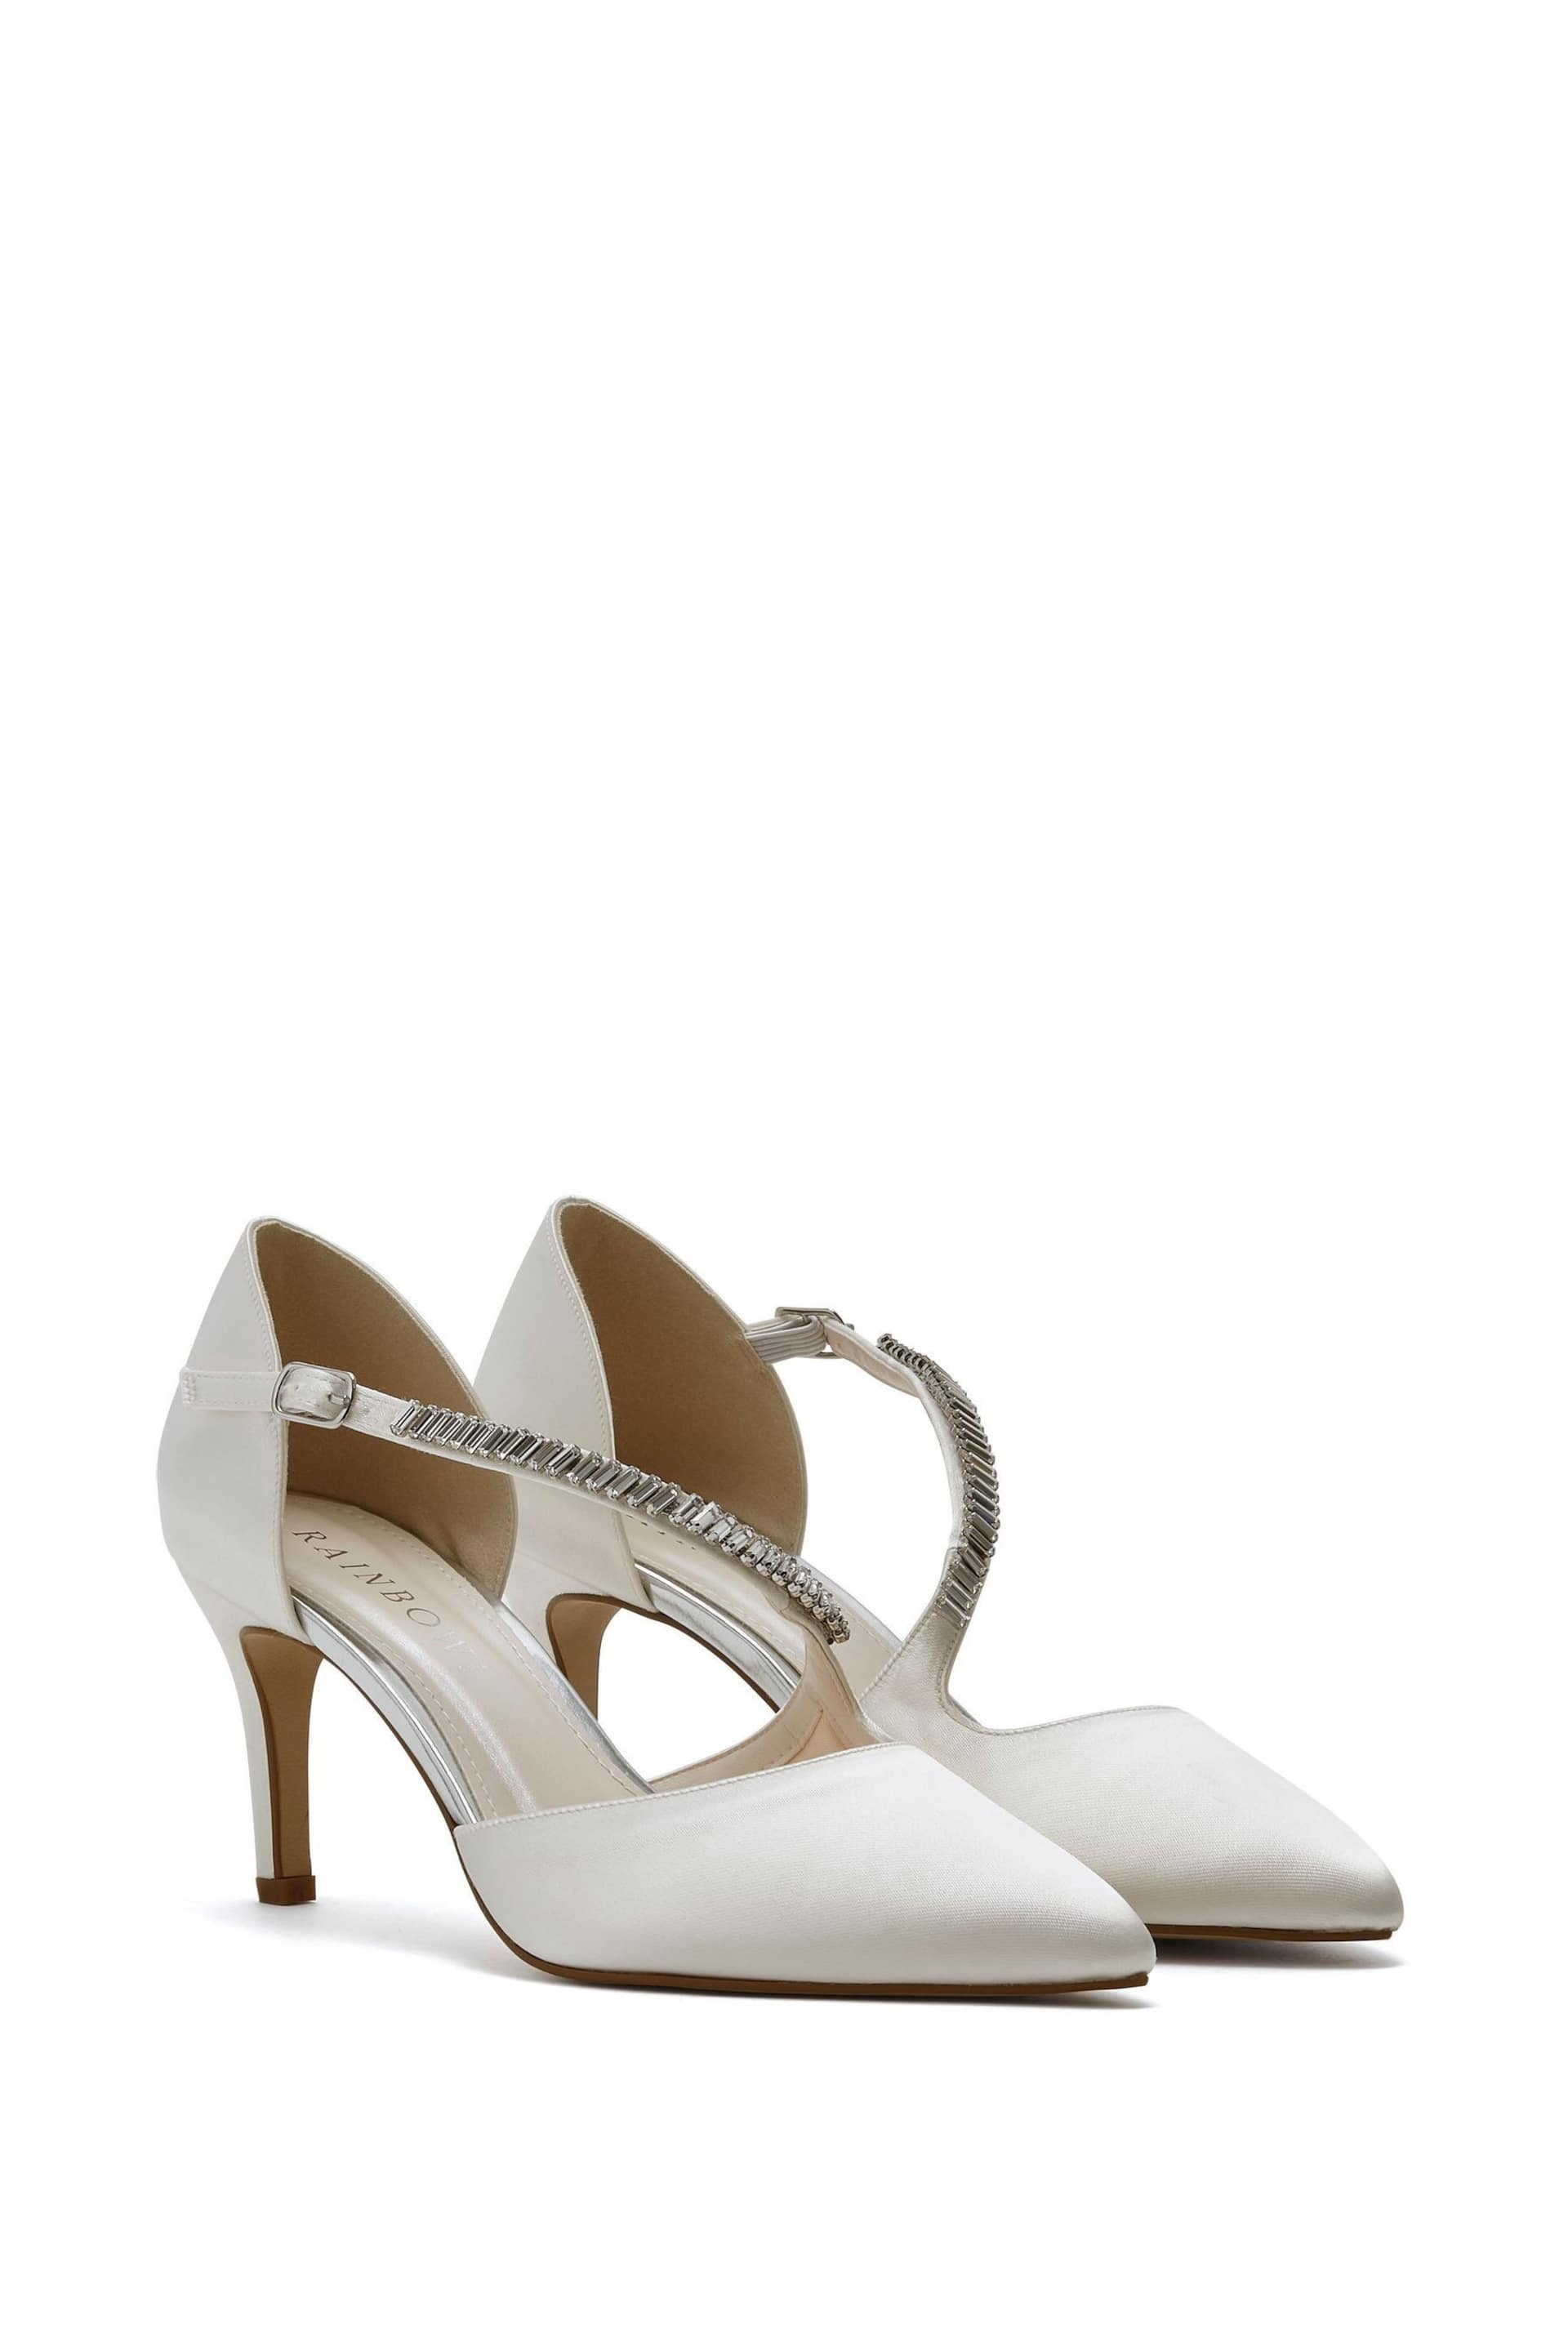 Rainbow Club Natural Raven Ivory Wedding Satin Court Shoes - Image 5 of 7